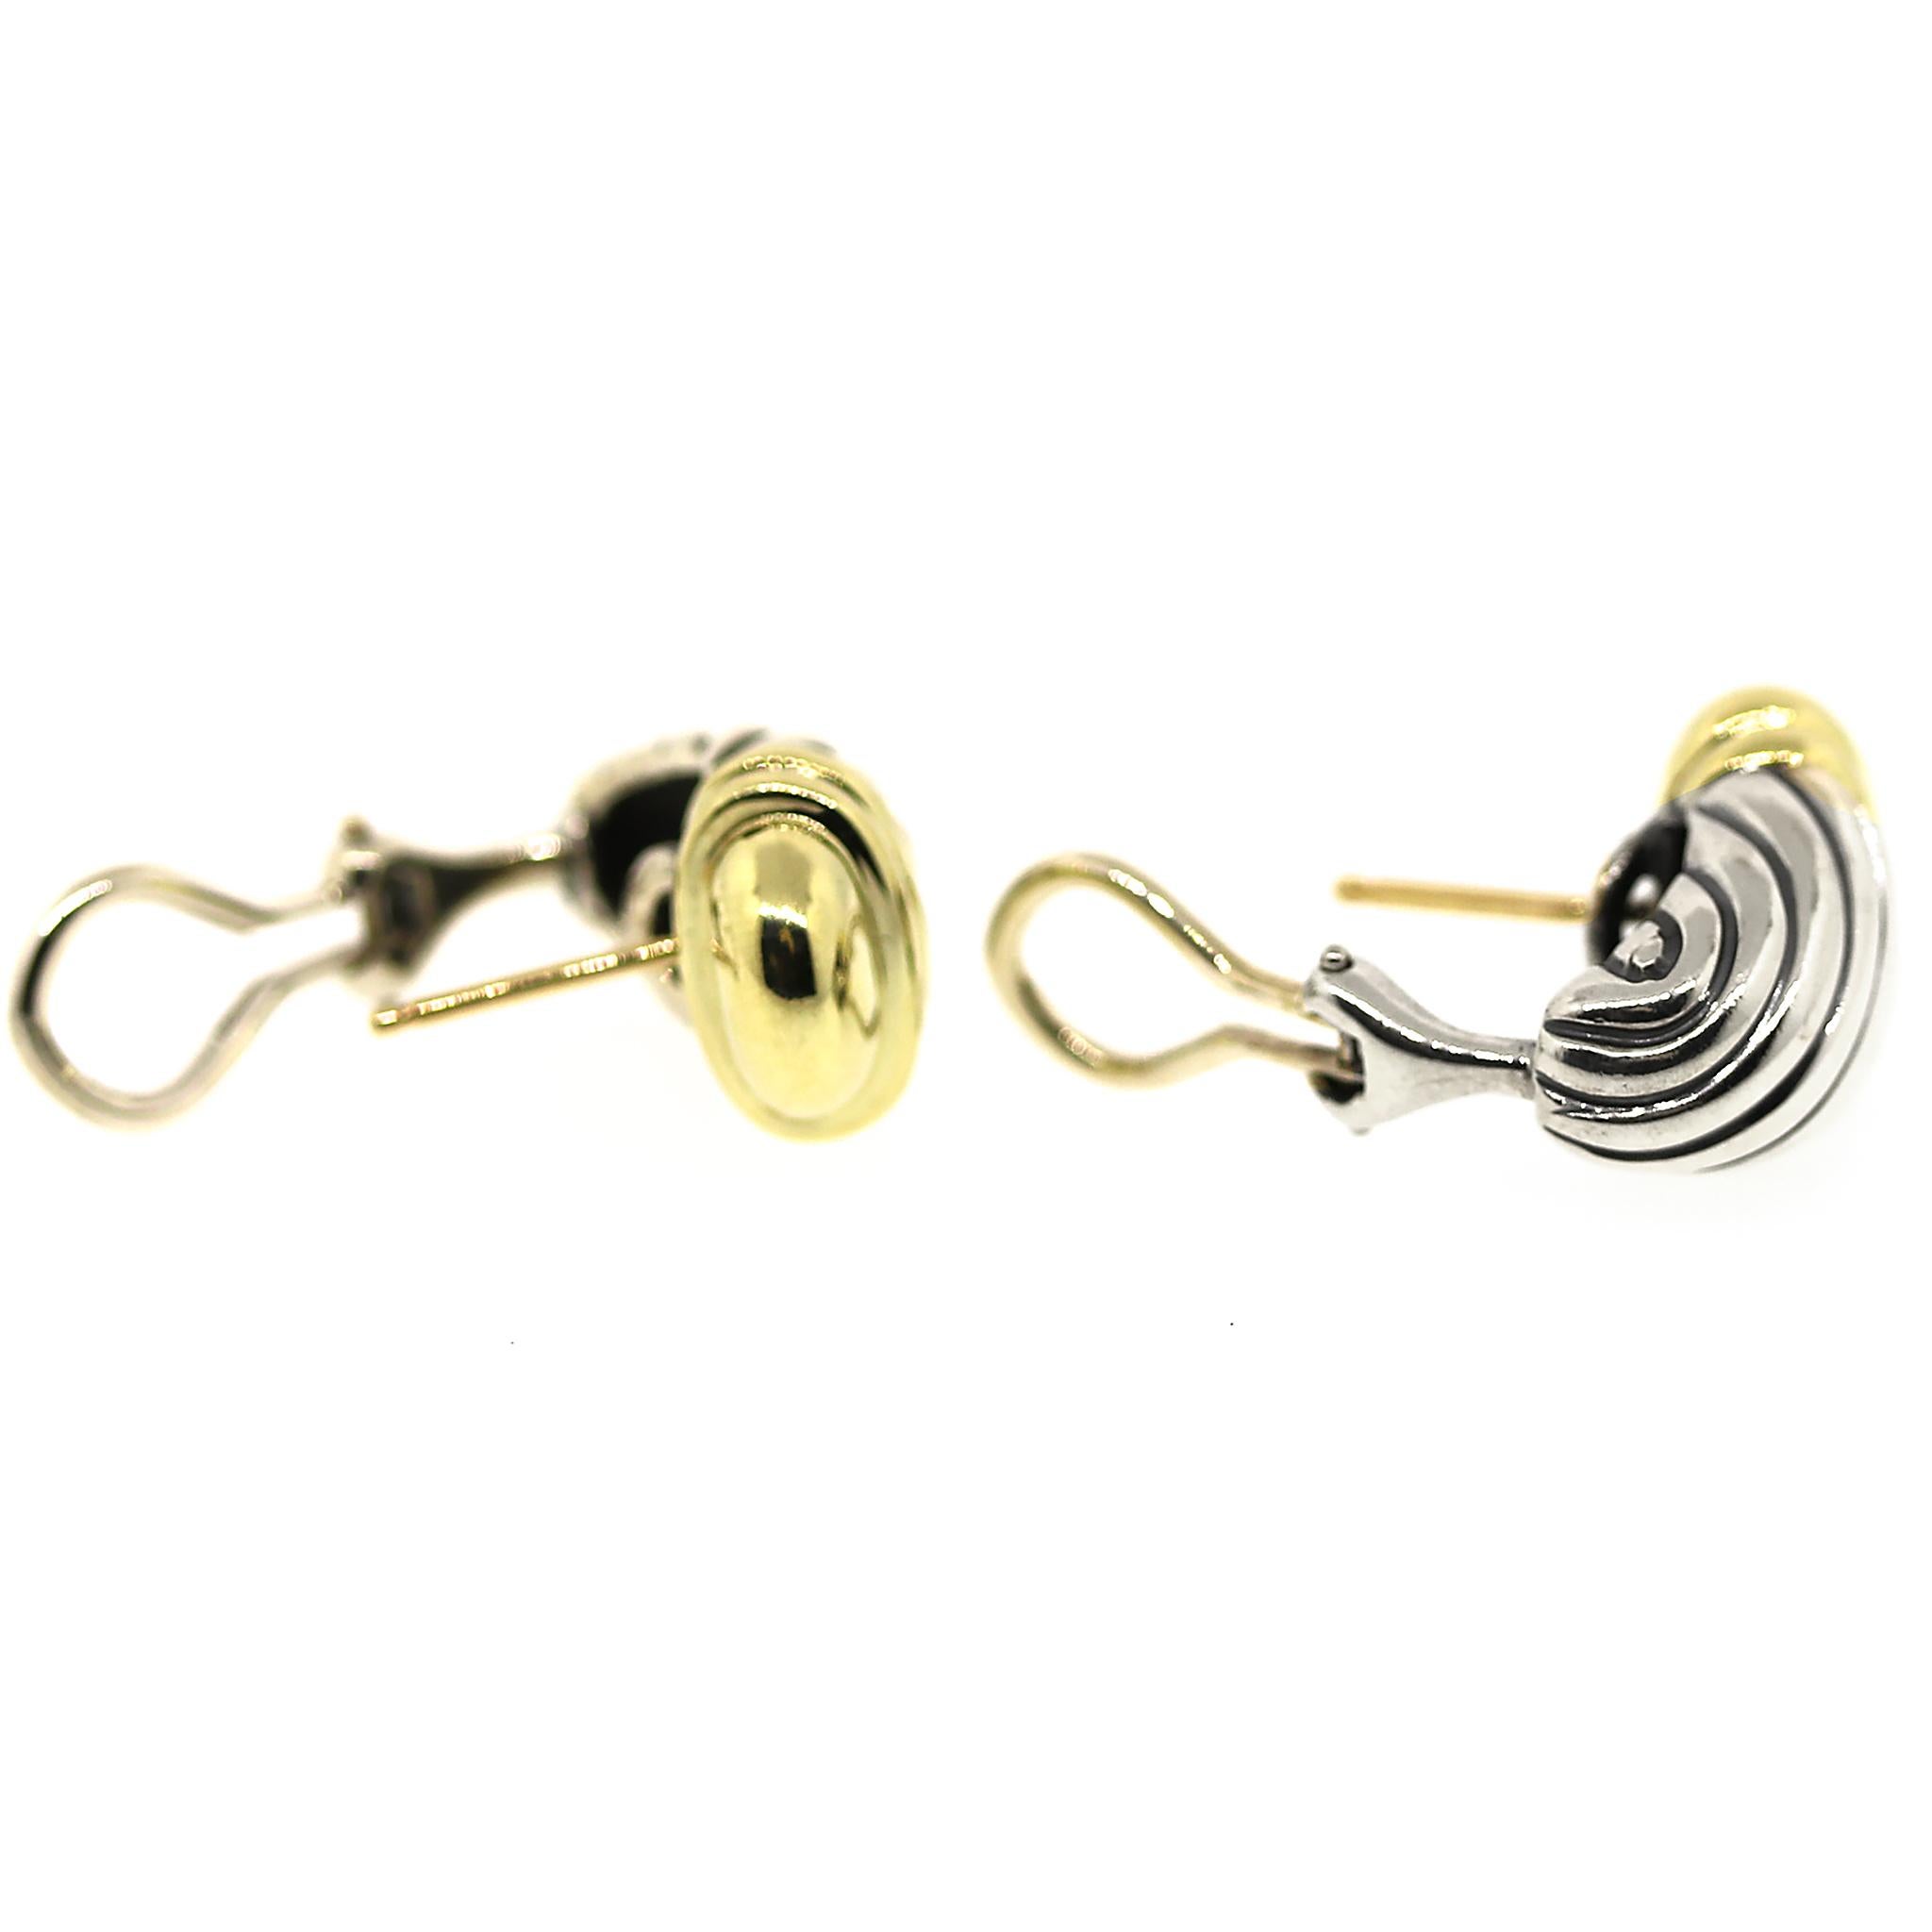 David Yurman Cable Shrimp Earrings in Sterling Silver and 14k Yellow Gold 1